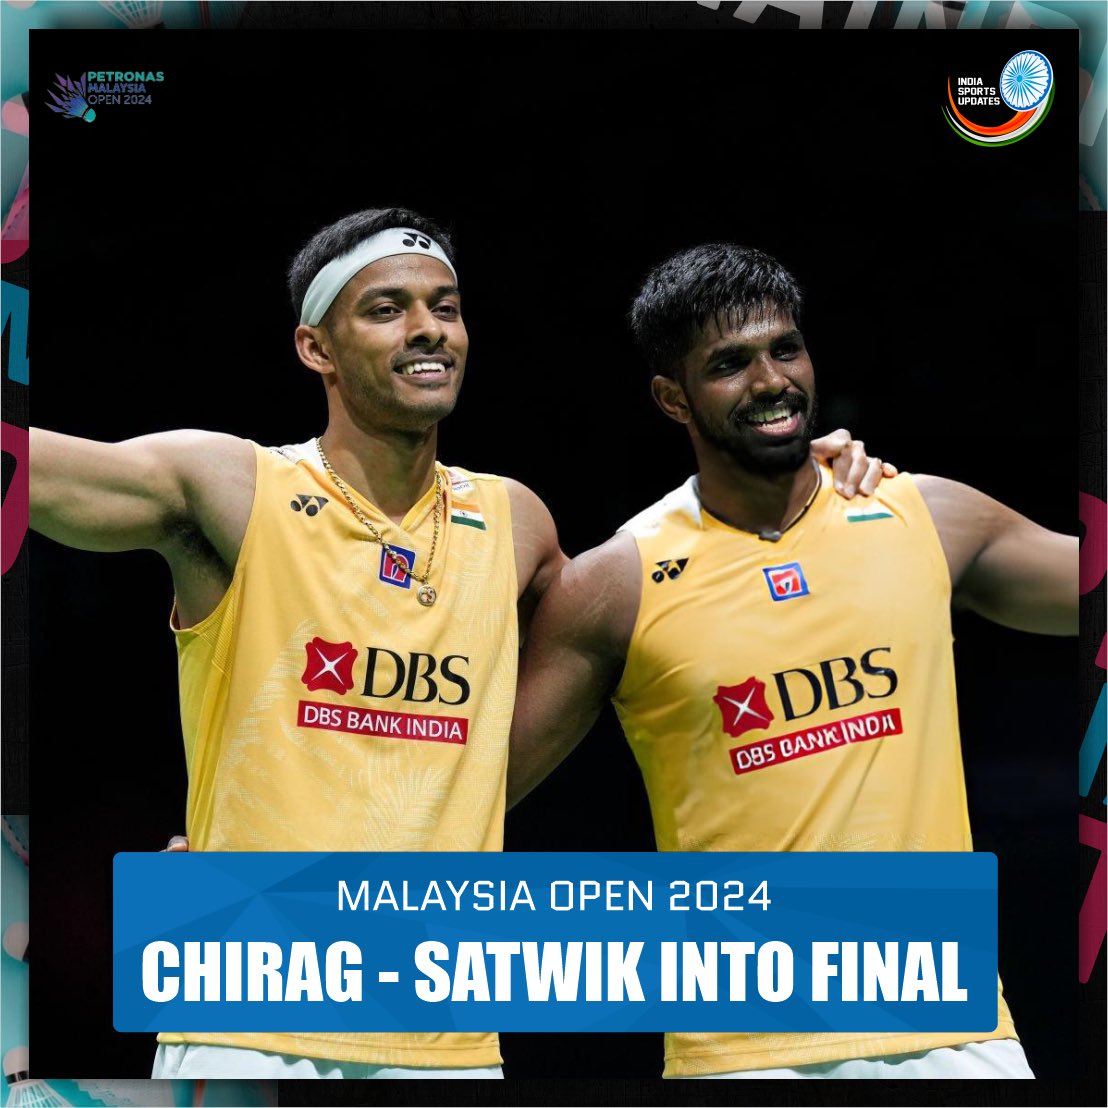 Storms into the Finals of #MalaysiaOpen2024 🙌